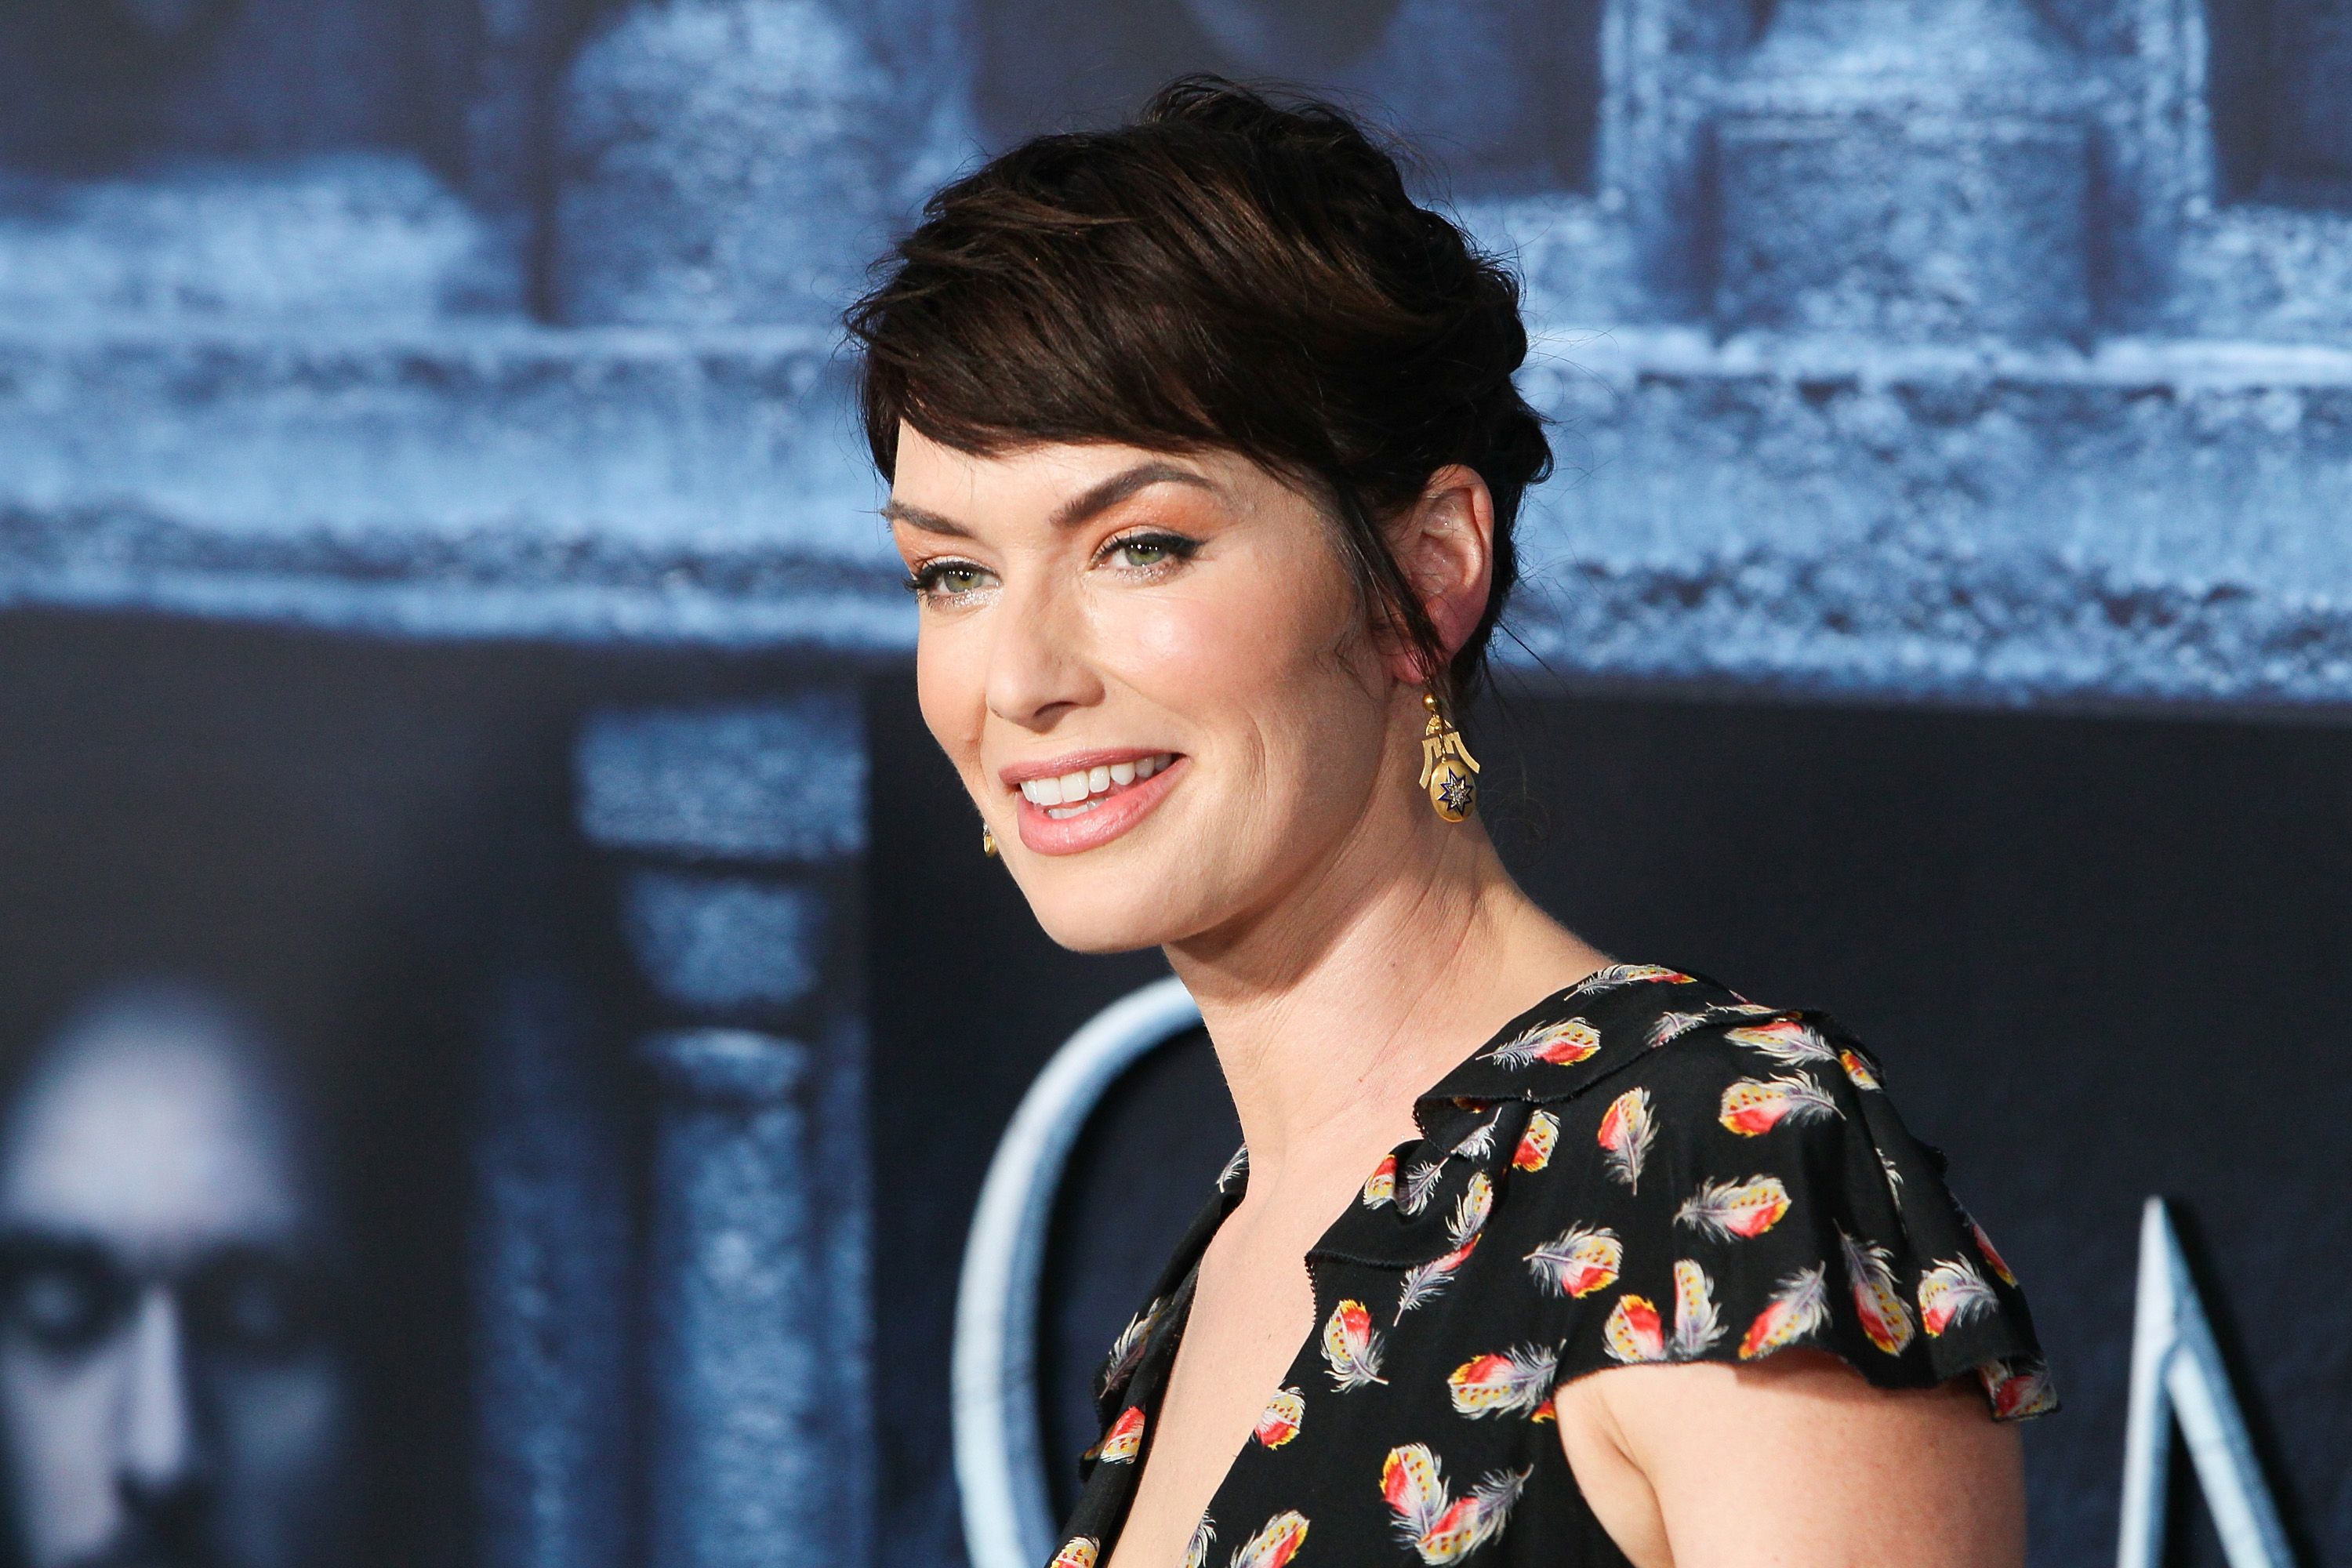 Lena Headey during the premiere of HBO's "Game of Thrones" Season 6 at the TCL Chinese Theatre on April 10, 2016, in Hollywood, California. | Source: Getty Images